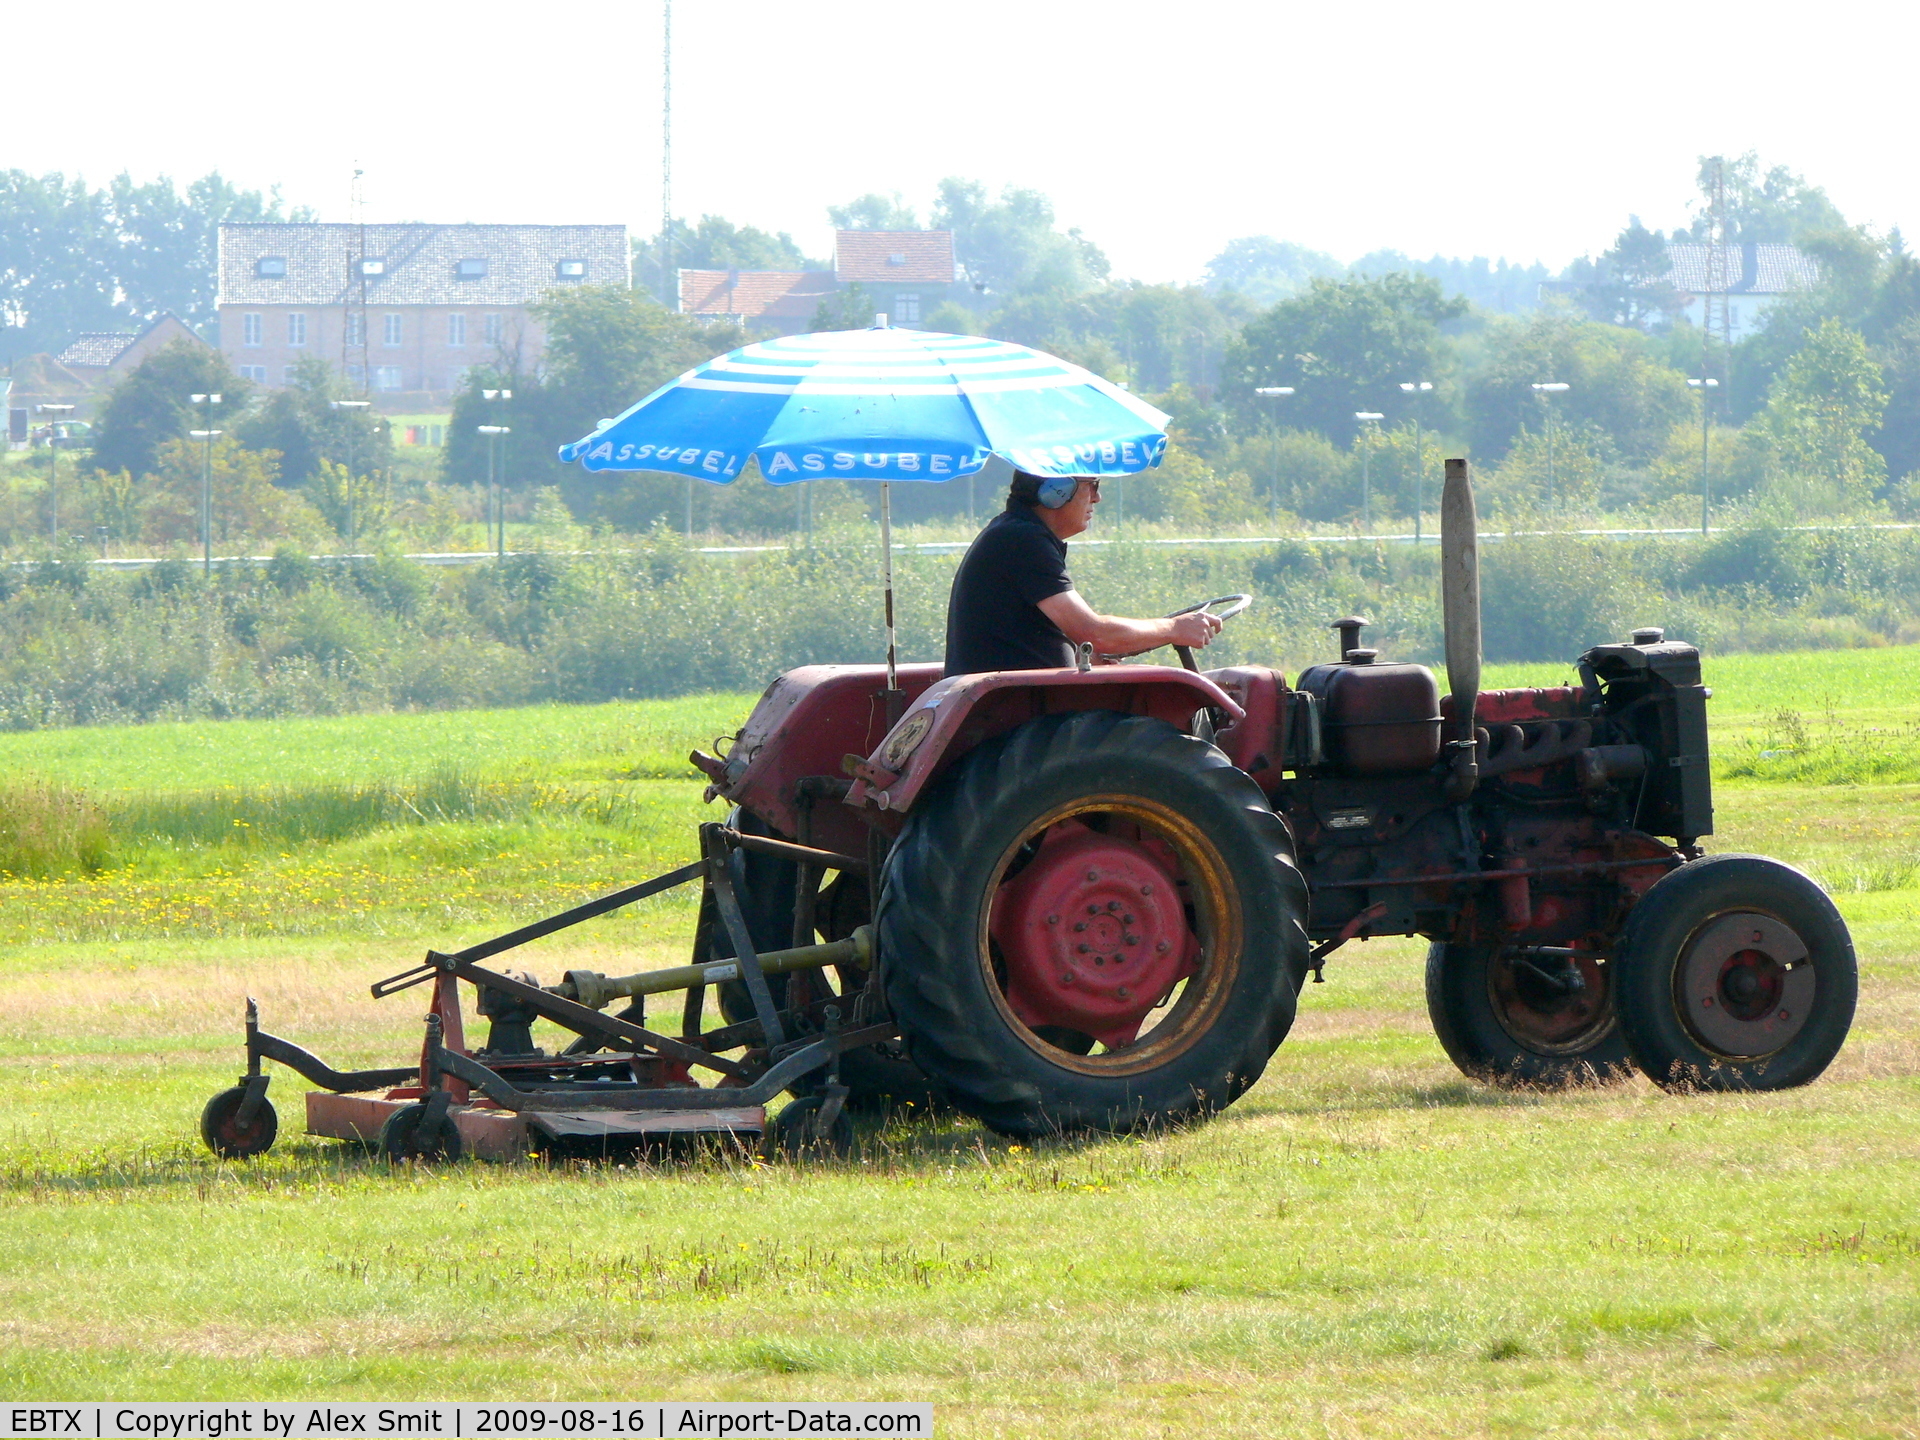 Verviers Airport, Theux Belgium (EBTX) - Mowing the lawn, it's tough job, but somebody 's got to do it.....